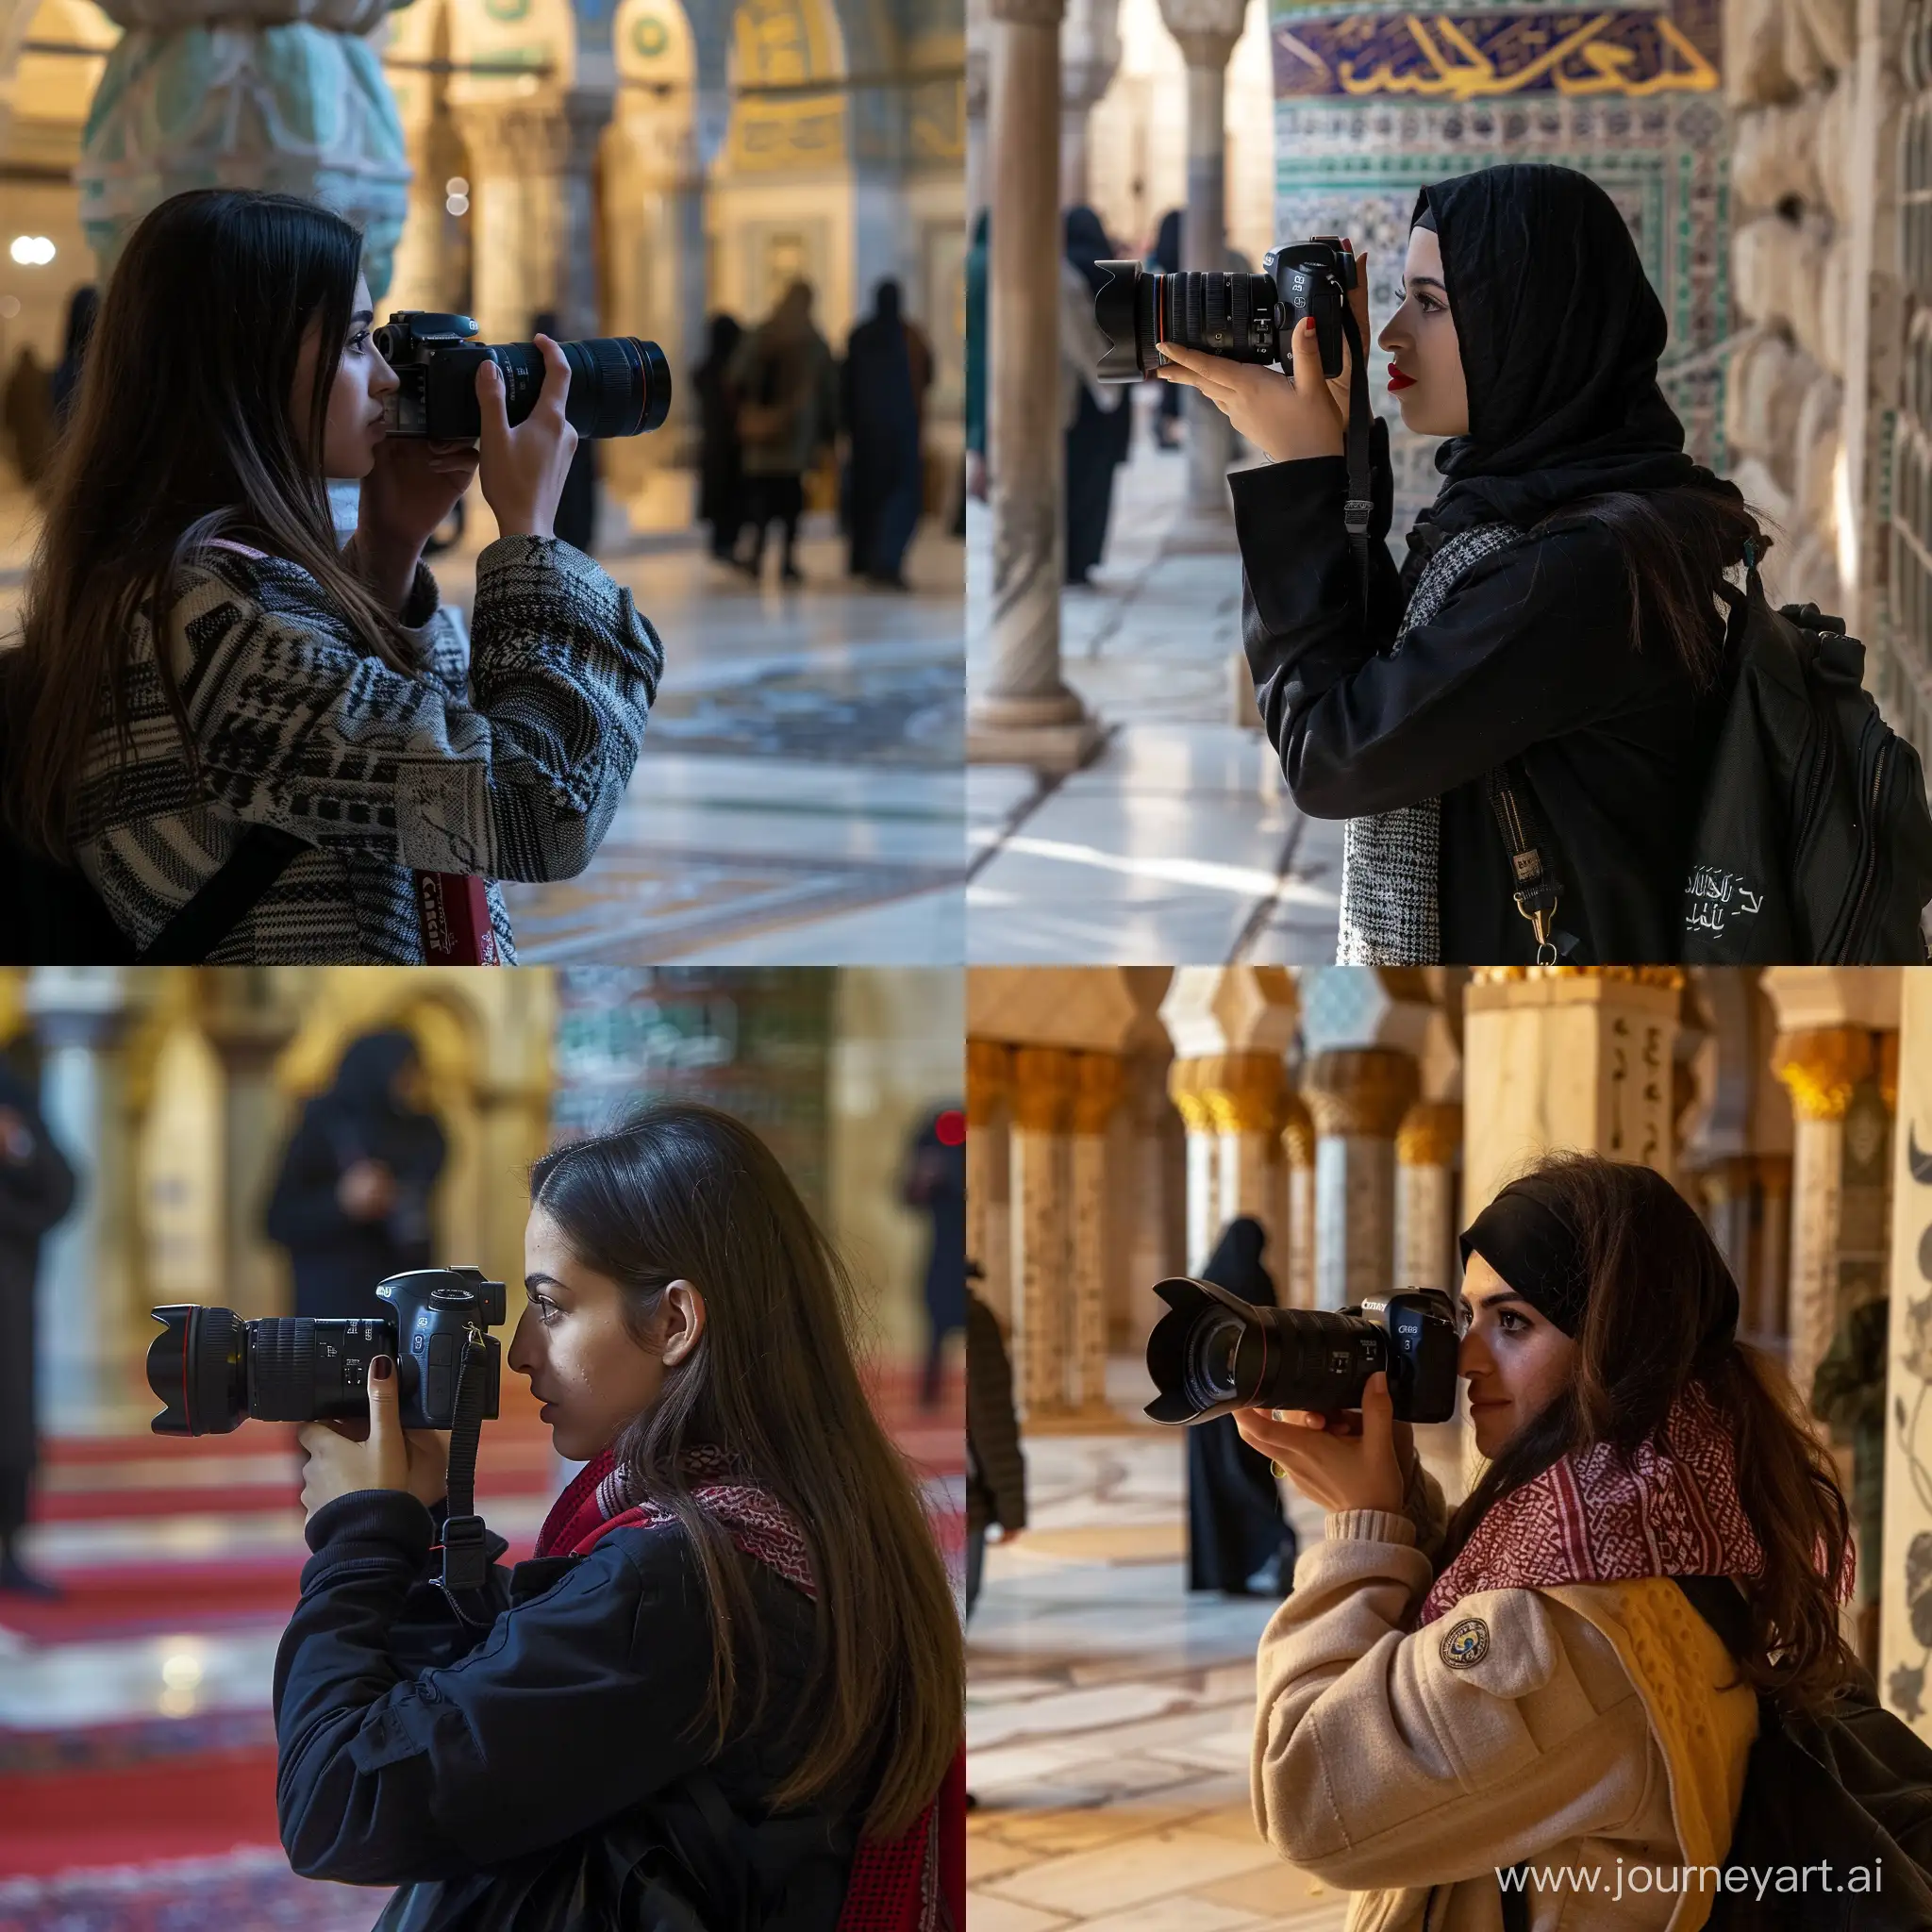 An innocent young female reporter, Hourieh, is taking a picture with Canon camera of the last savior Mahdi in Al-Aqsa Mosque